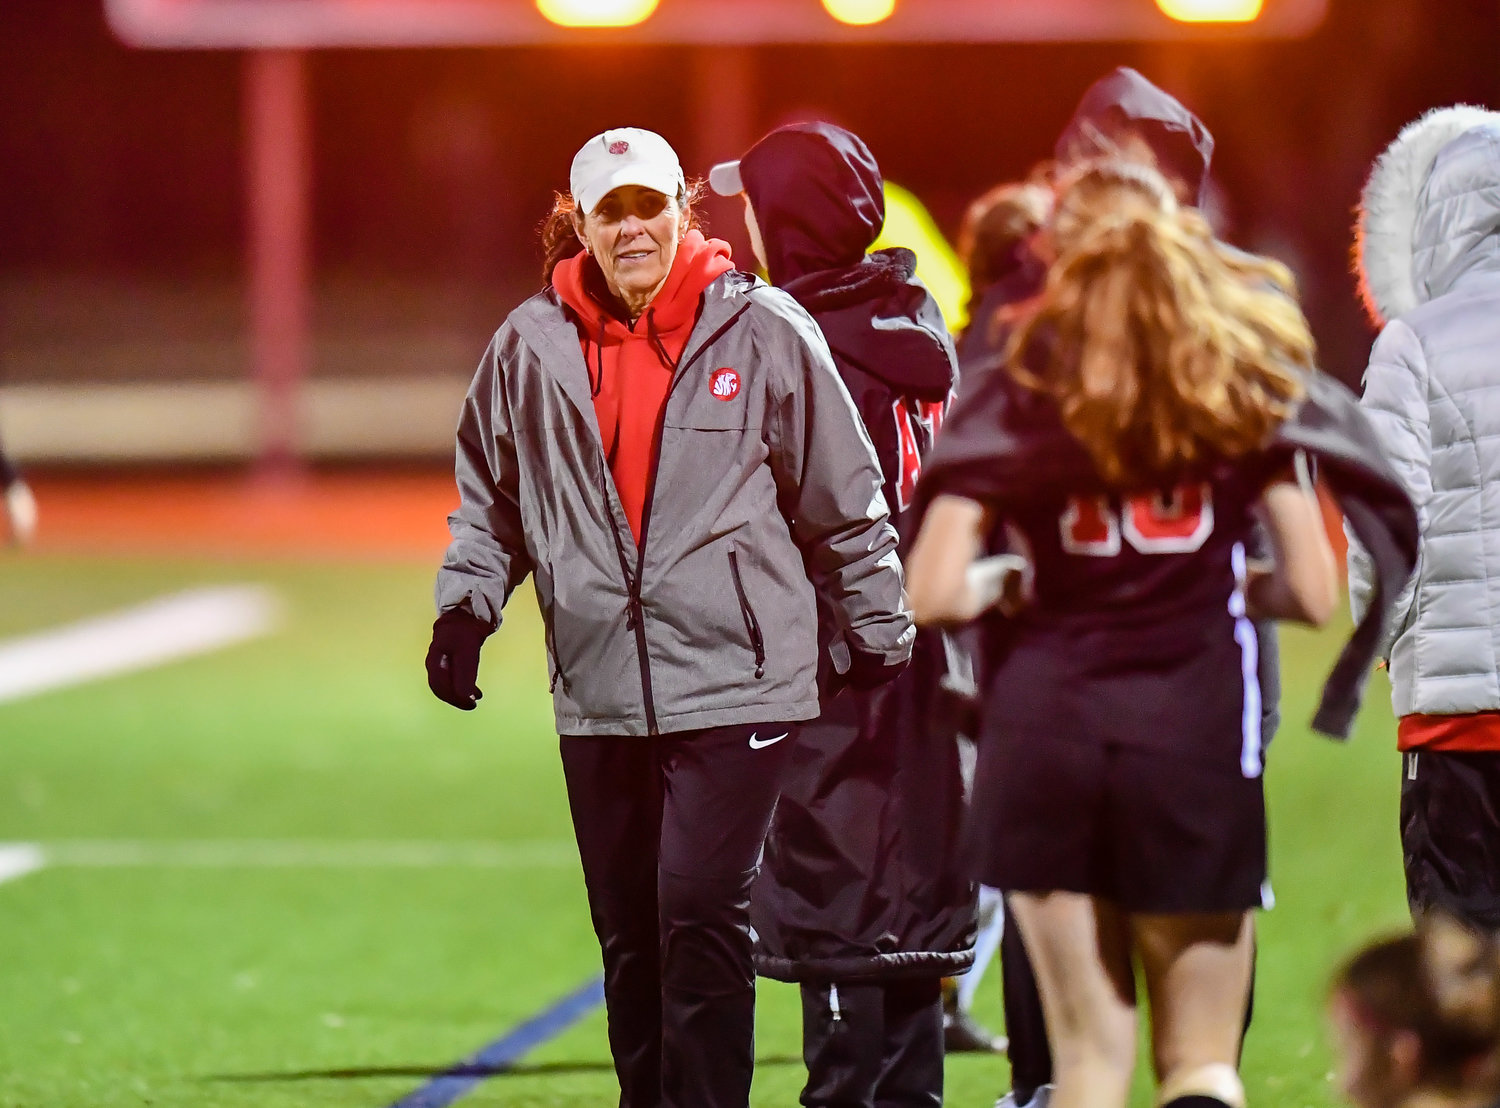 March 8,, 2022: Katy's head coach Dianne Loftin picks up the win in her final home game during their soccer match against Katy Taylor. (Photo by Mark Goodman / Katy Times)